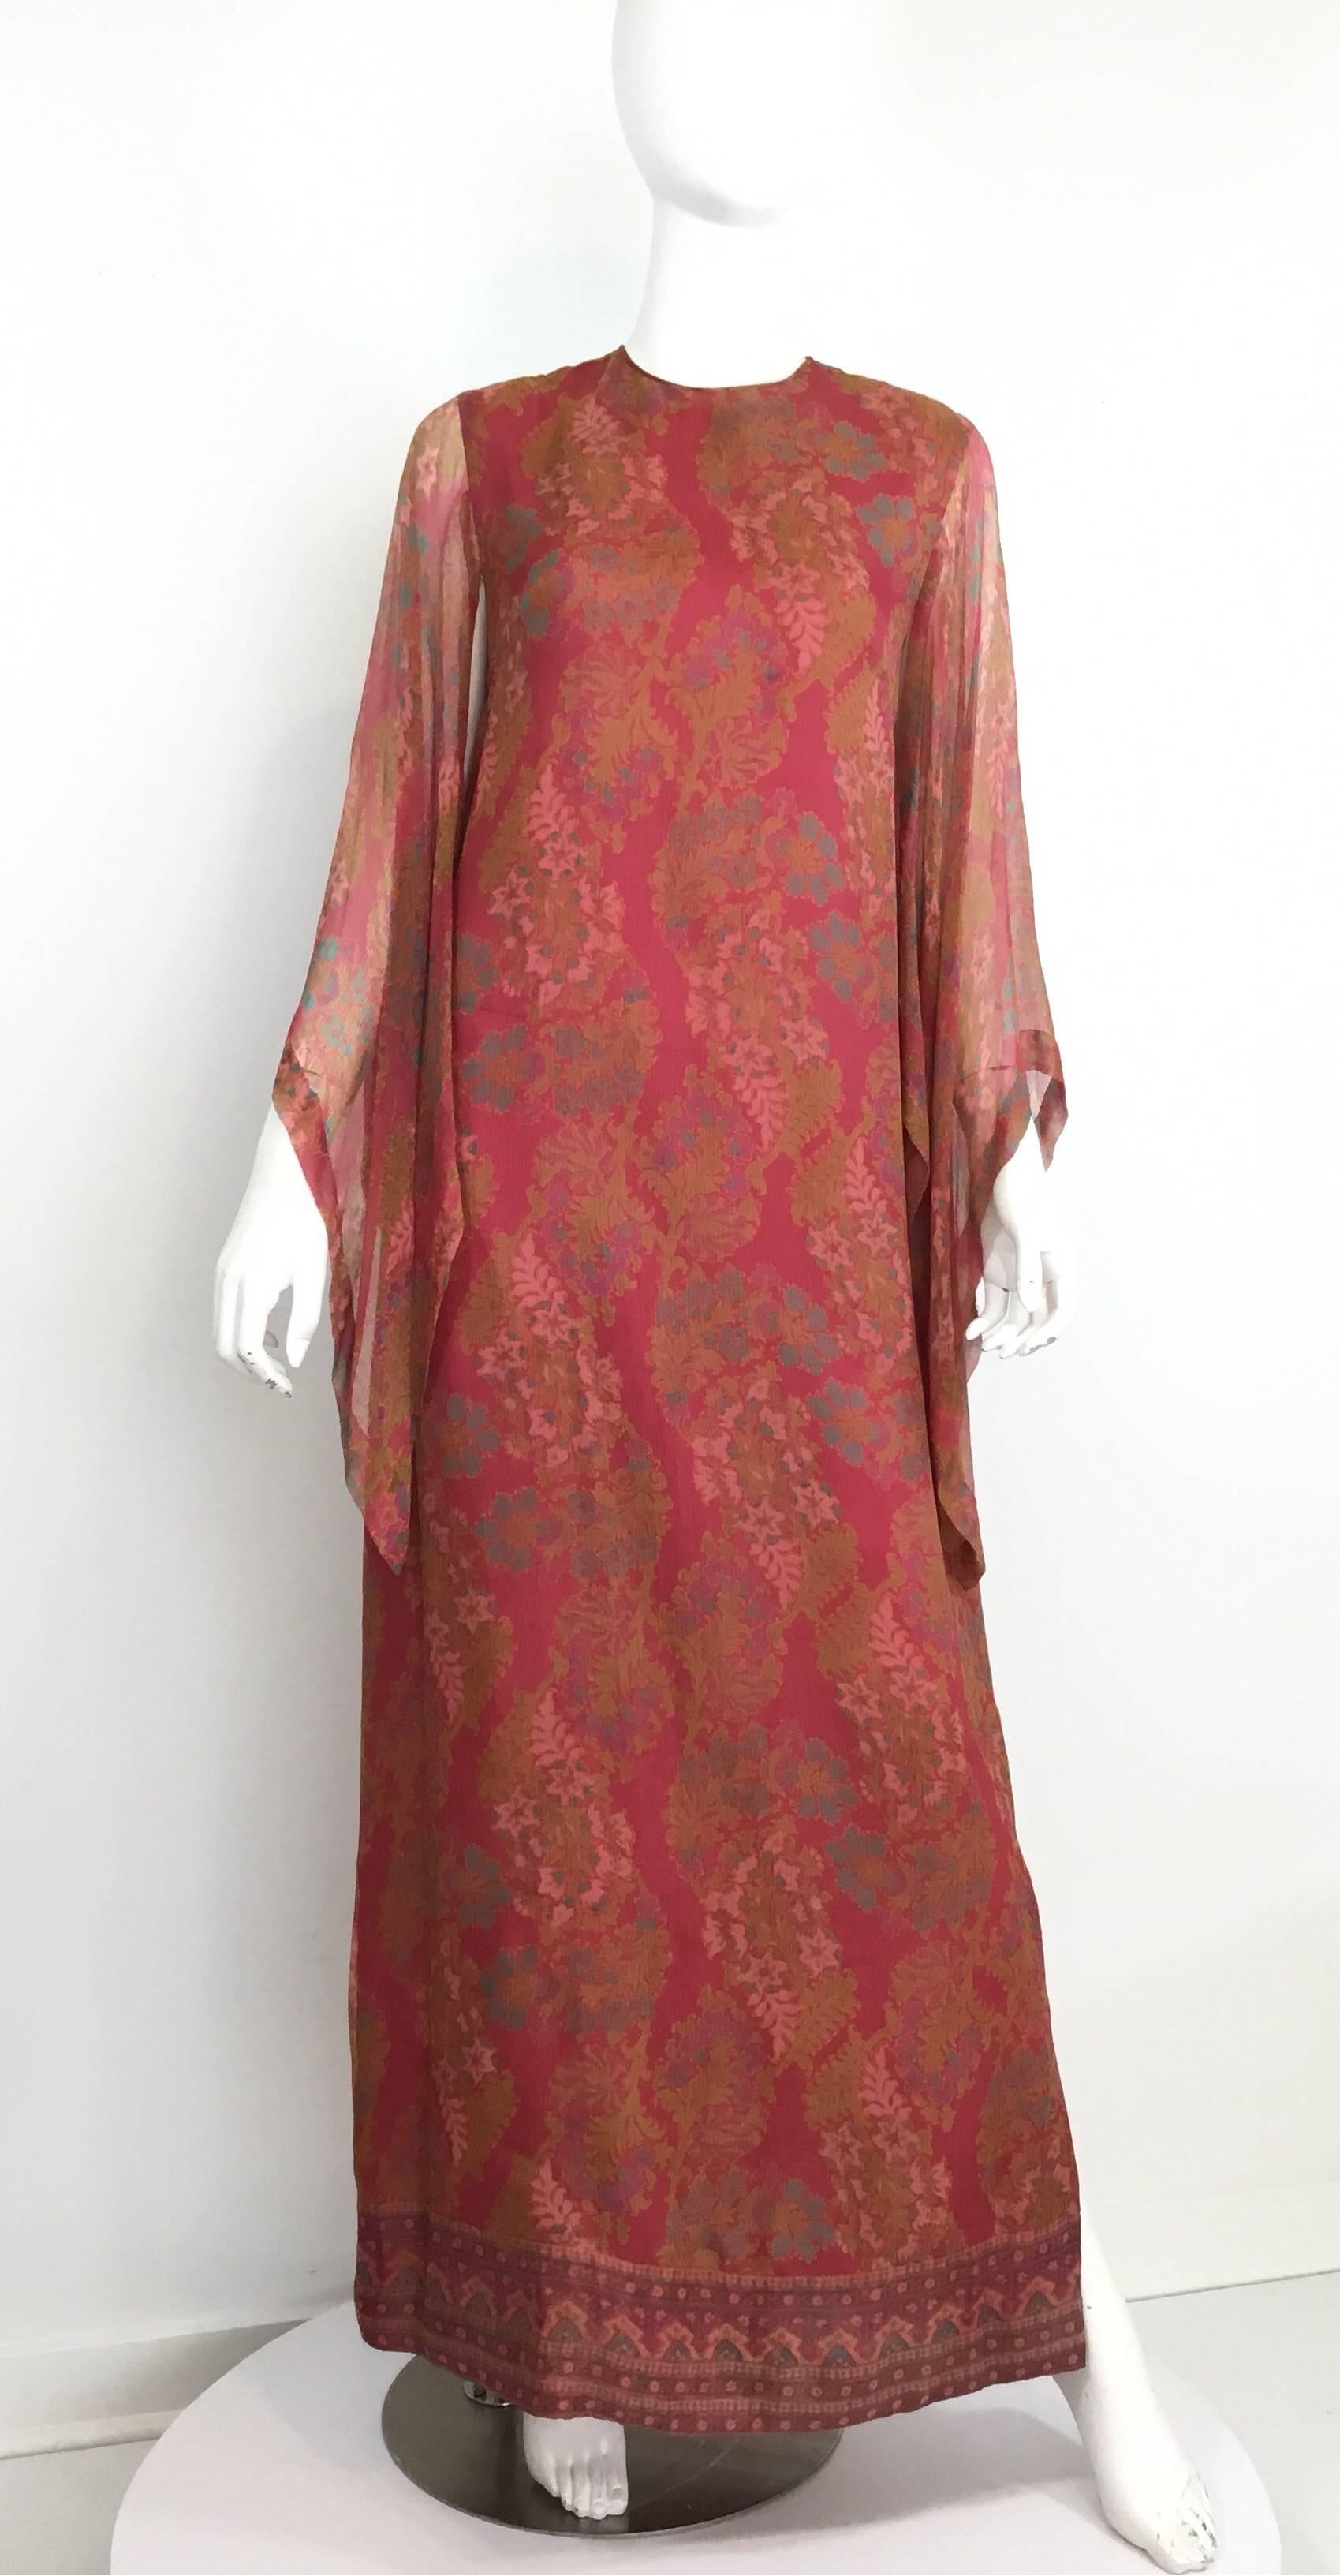 Treacy Lowe caftan featured in dusty rose and subtle multicolored print throughout a delicate silk chiffon. Caftan has short sleeves with a cape layered over the shoulders, back zipper fastening, and an optional scarf tie. Made in England. UK size